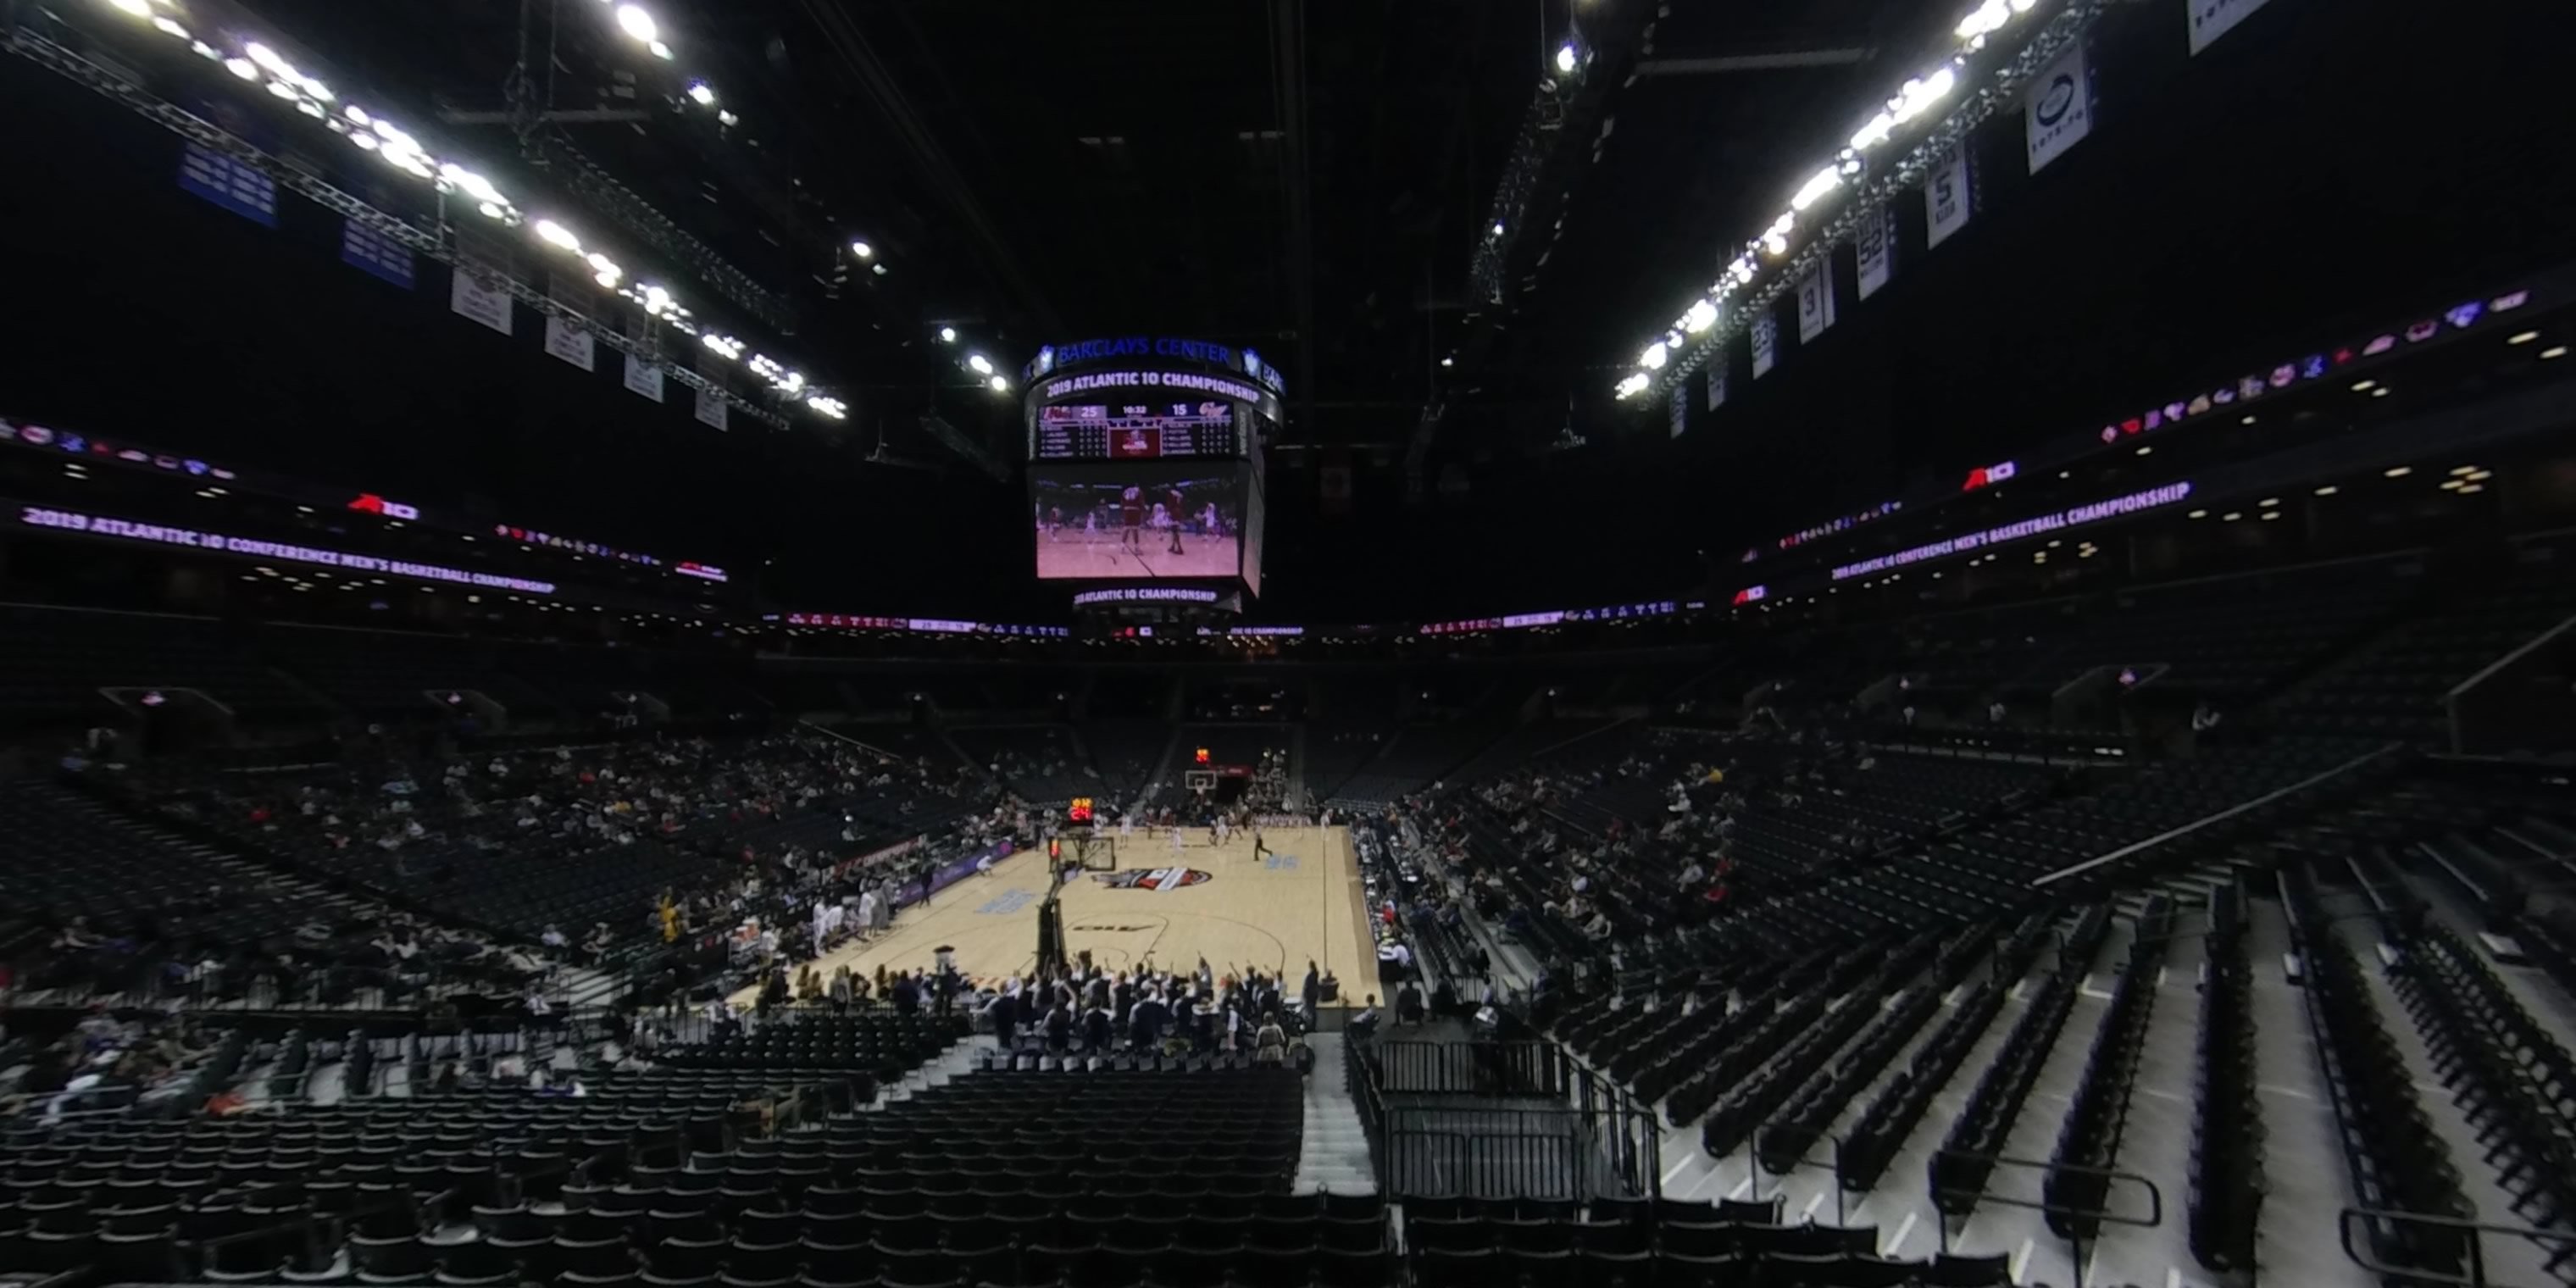 loge box 4 panoramic seat view  for basketball - barclays center